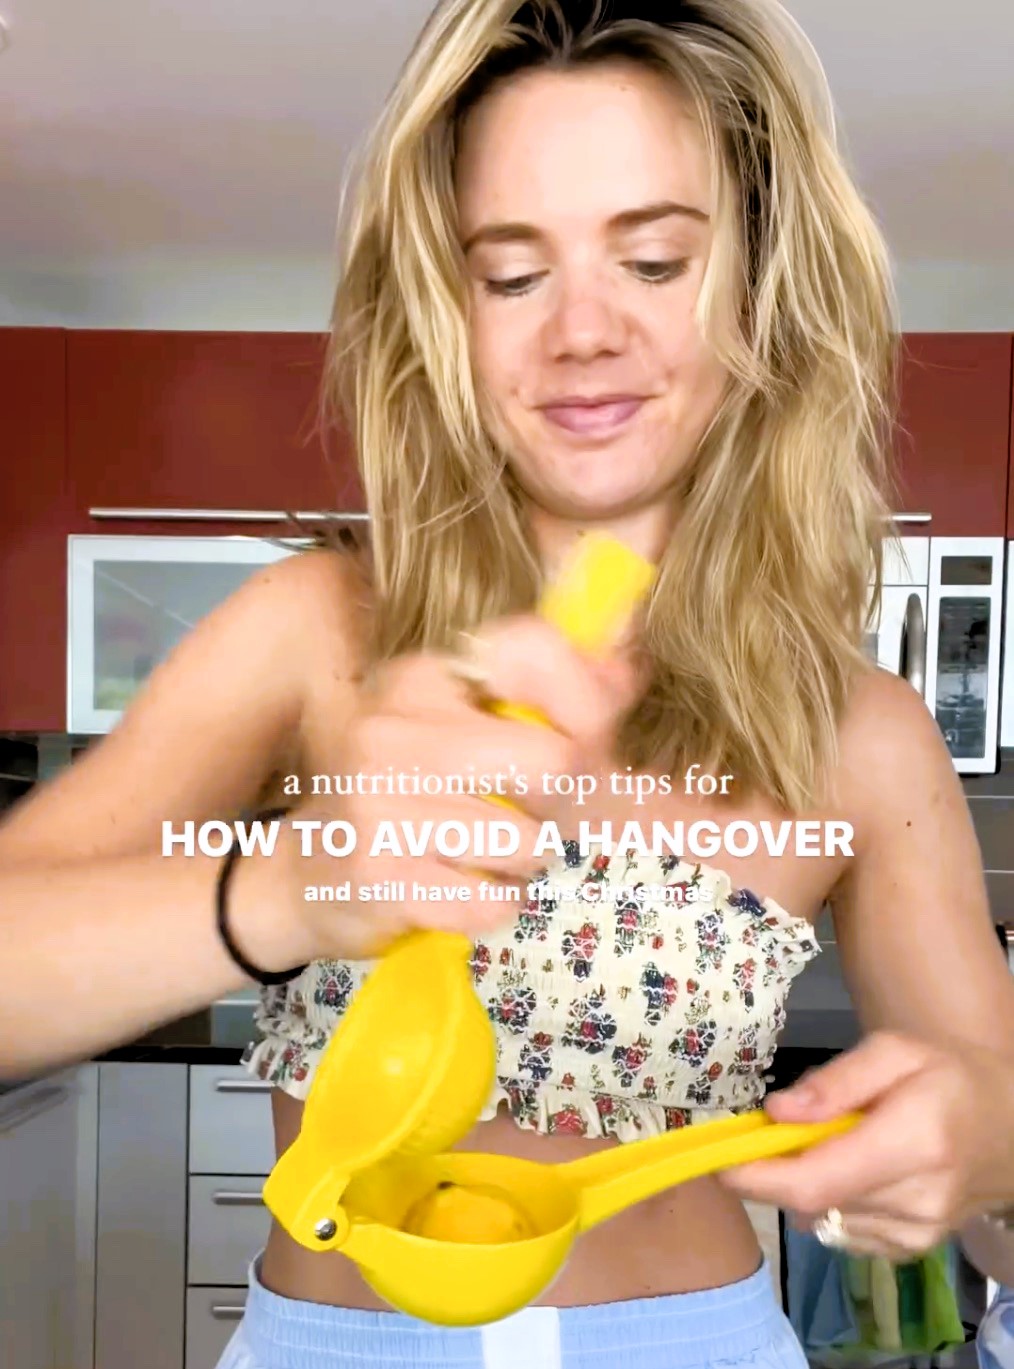 nutritionist sharing tips on how to avoid a hangover on holiday season.